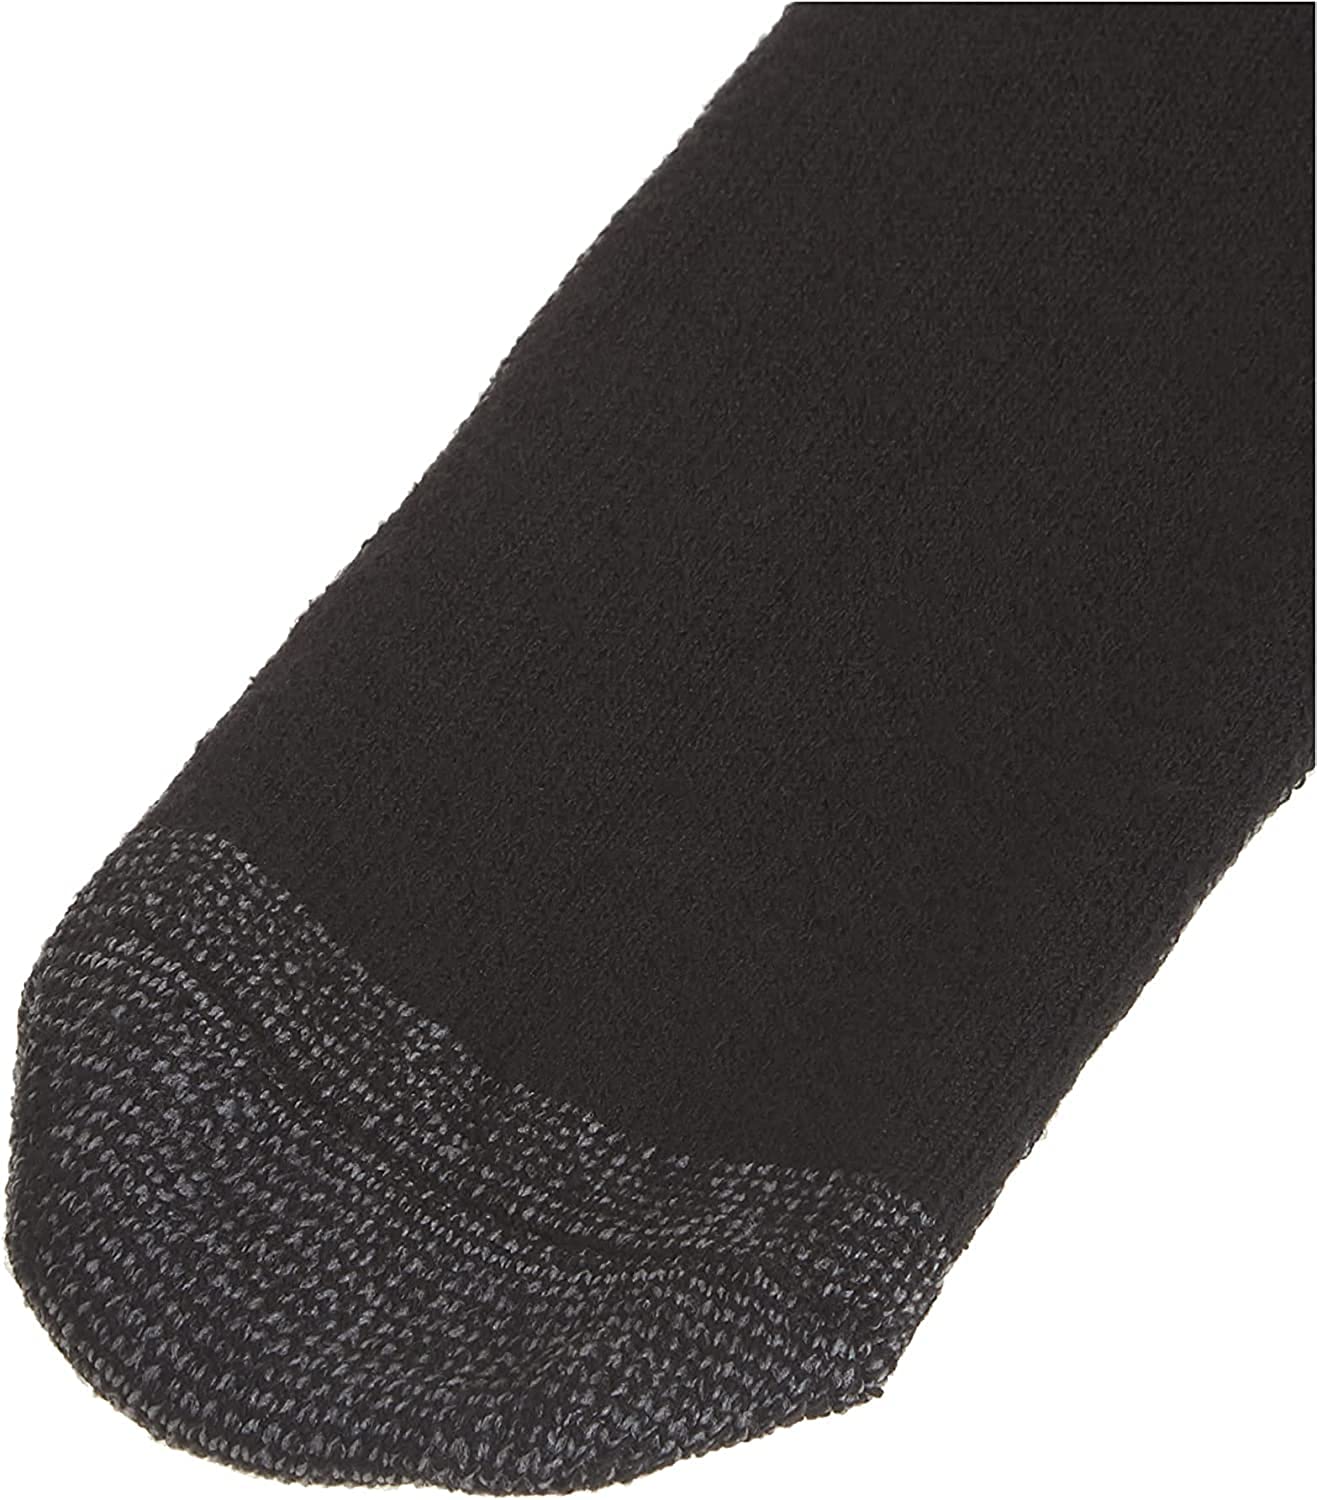 Men's 6 pairs Pack Athletic Tube Socks Running Sports OVER THE CALF Full Cushioned Premium Soft Cotton Big and Tall